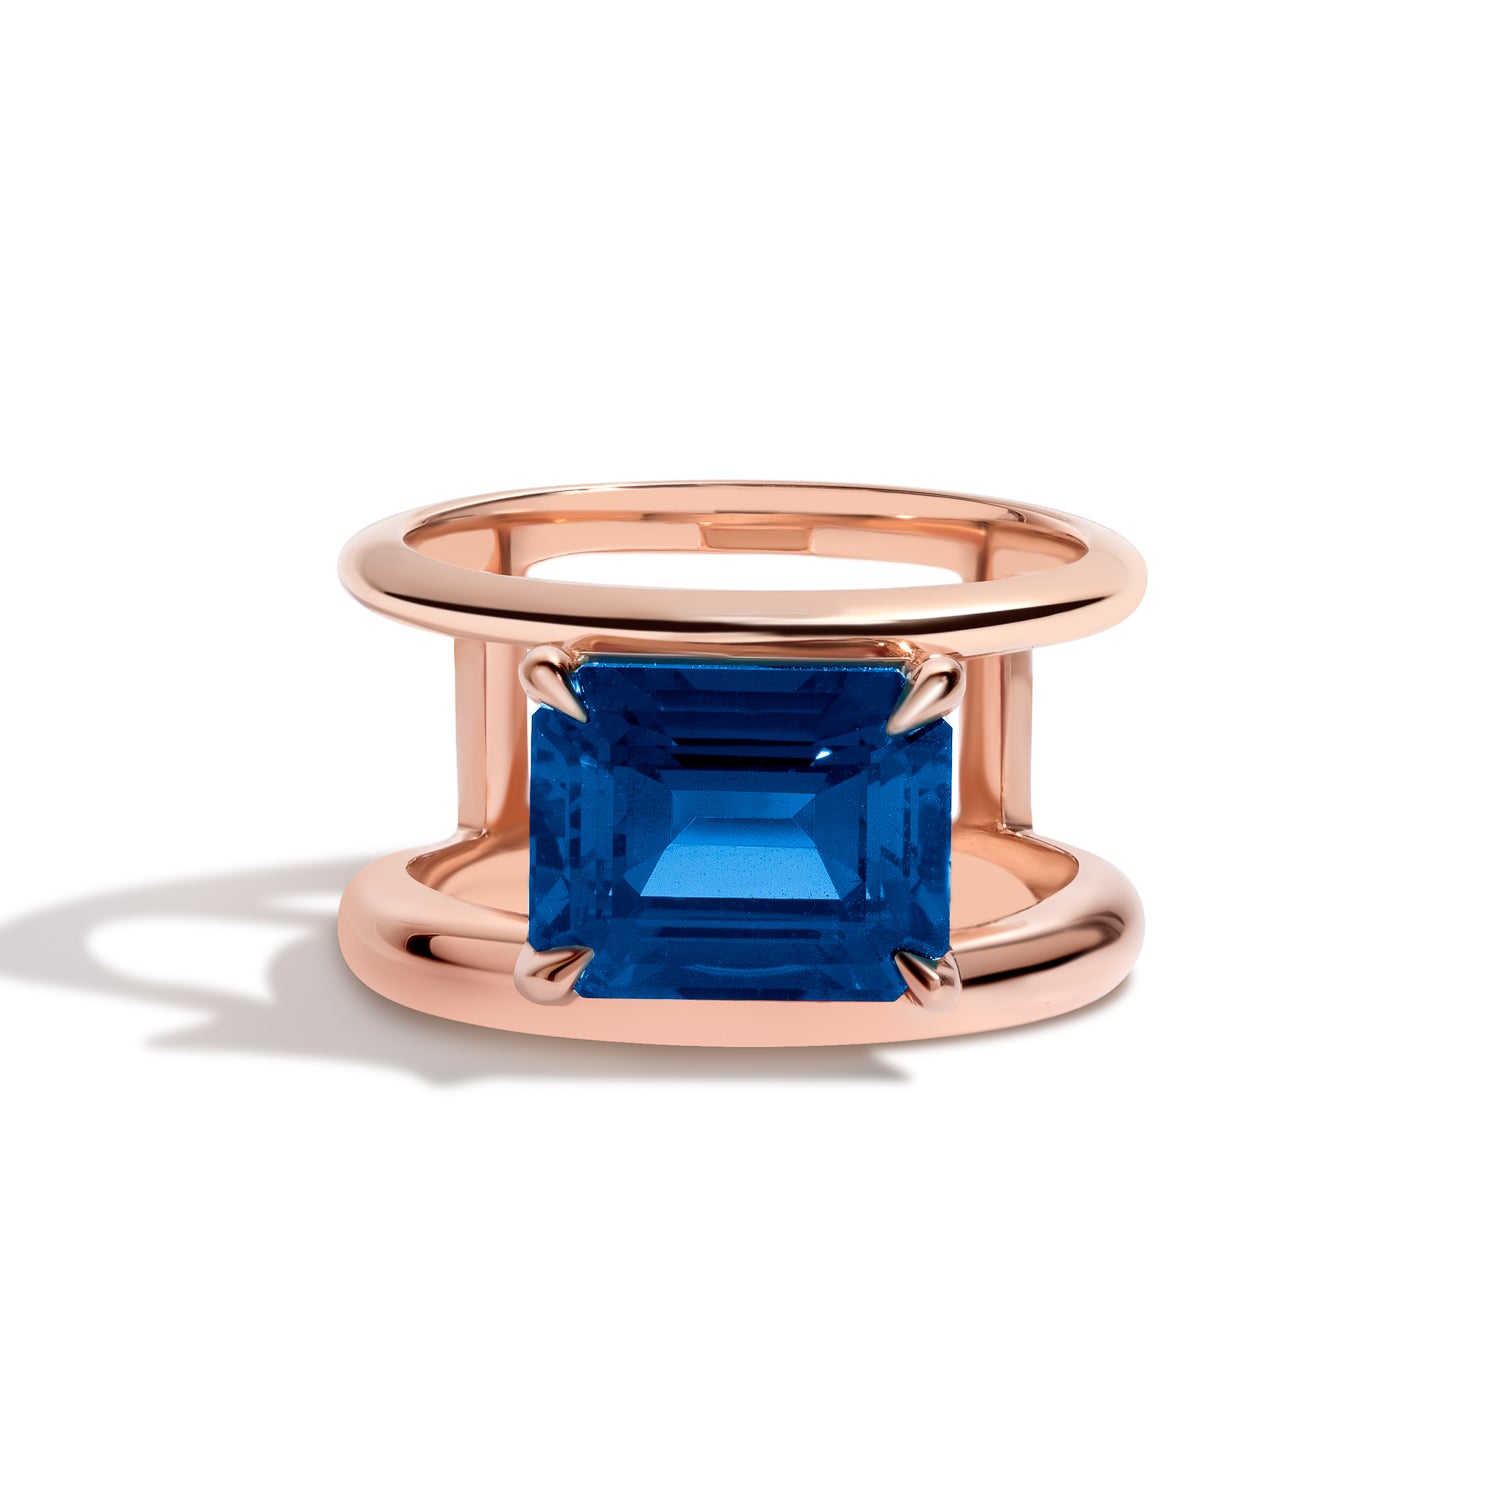 Shahla Karimi Jewelry Sapphire Double Band Ring 14K Rose Gold